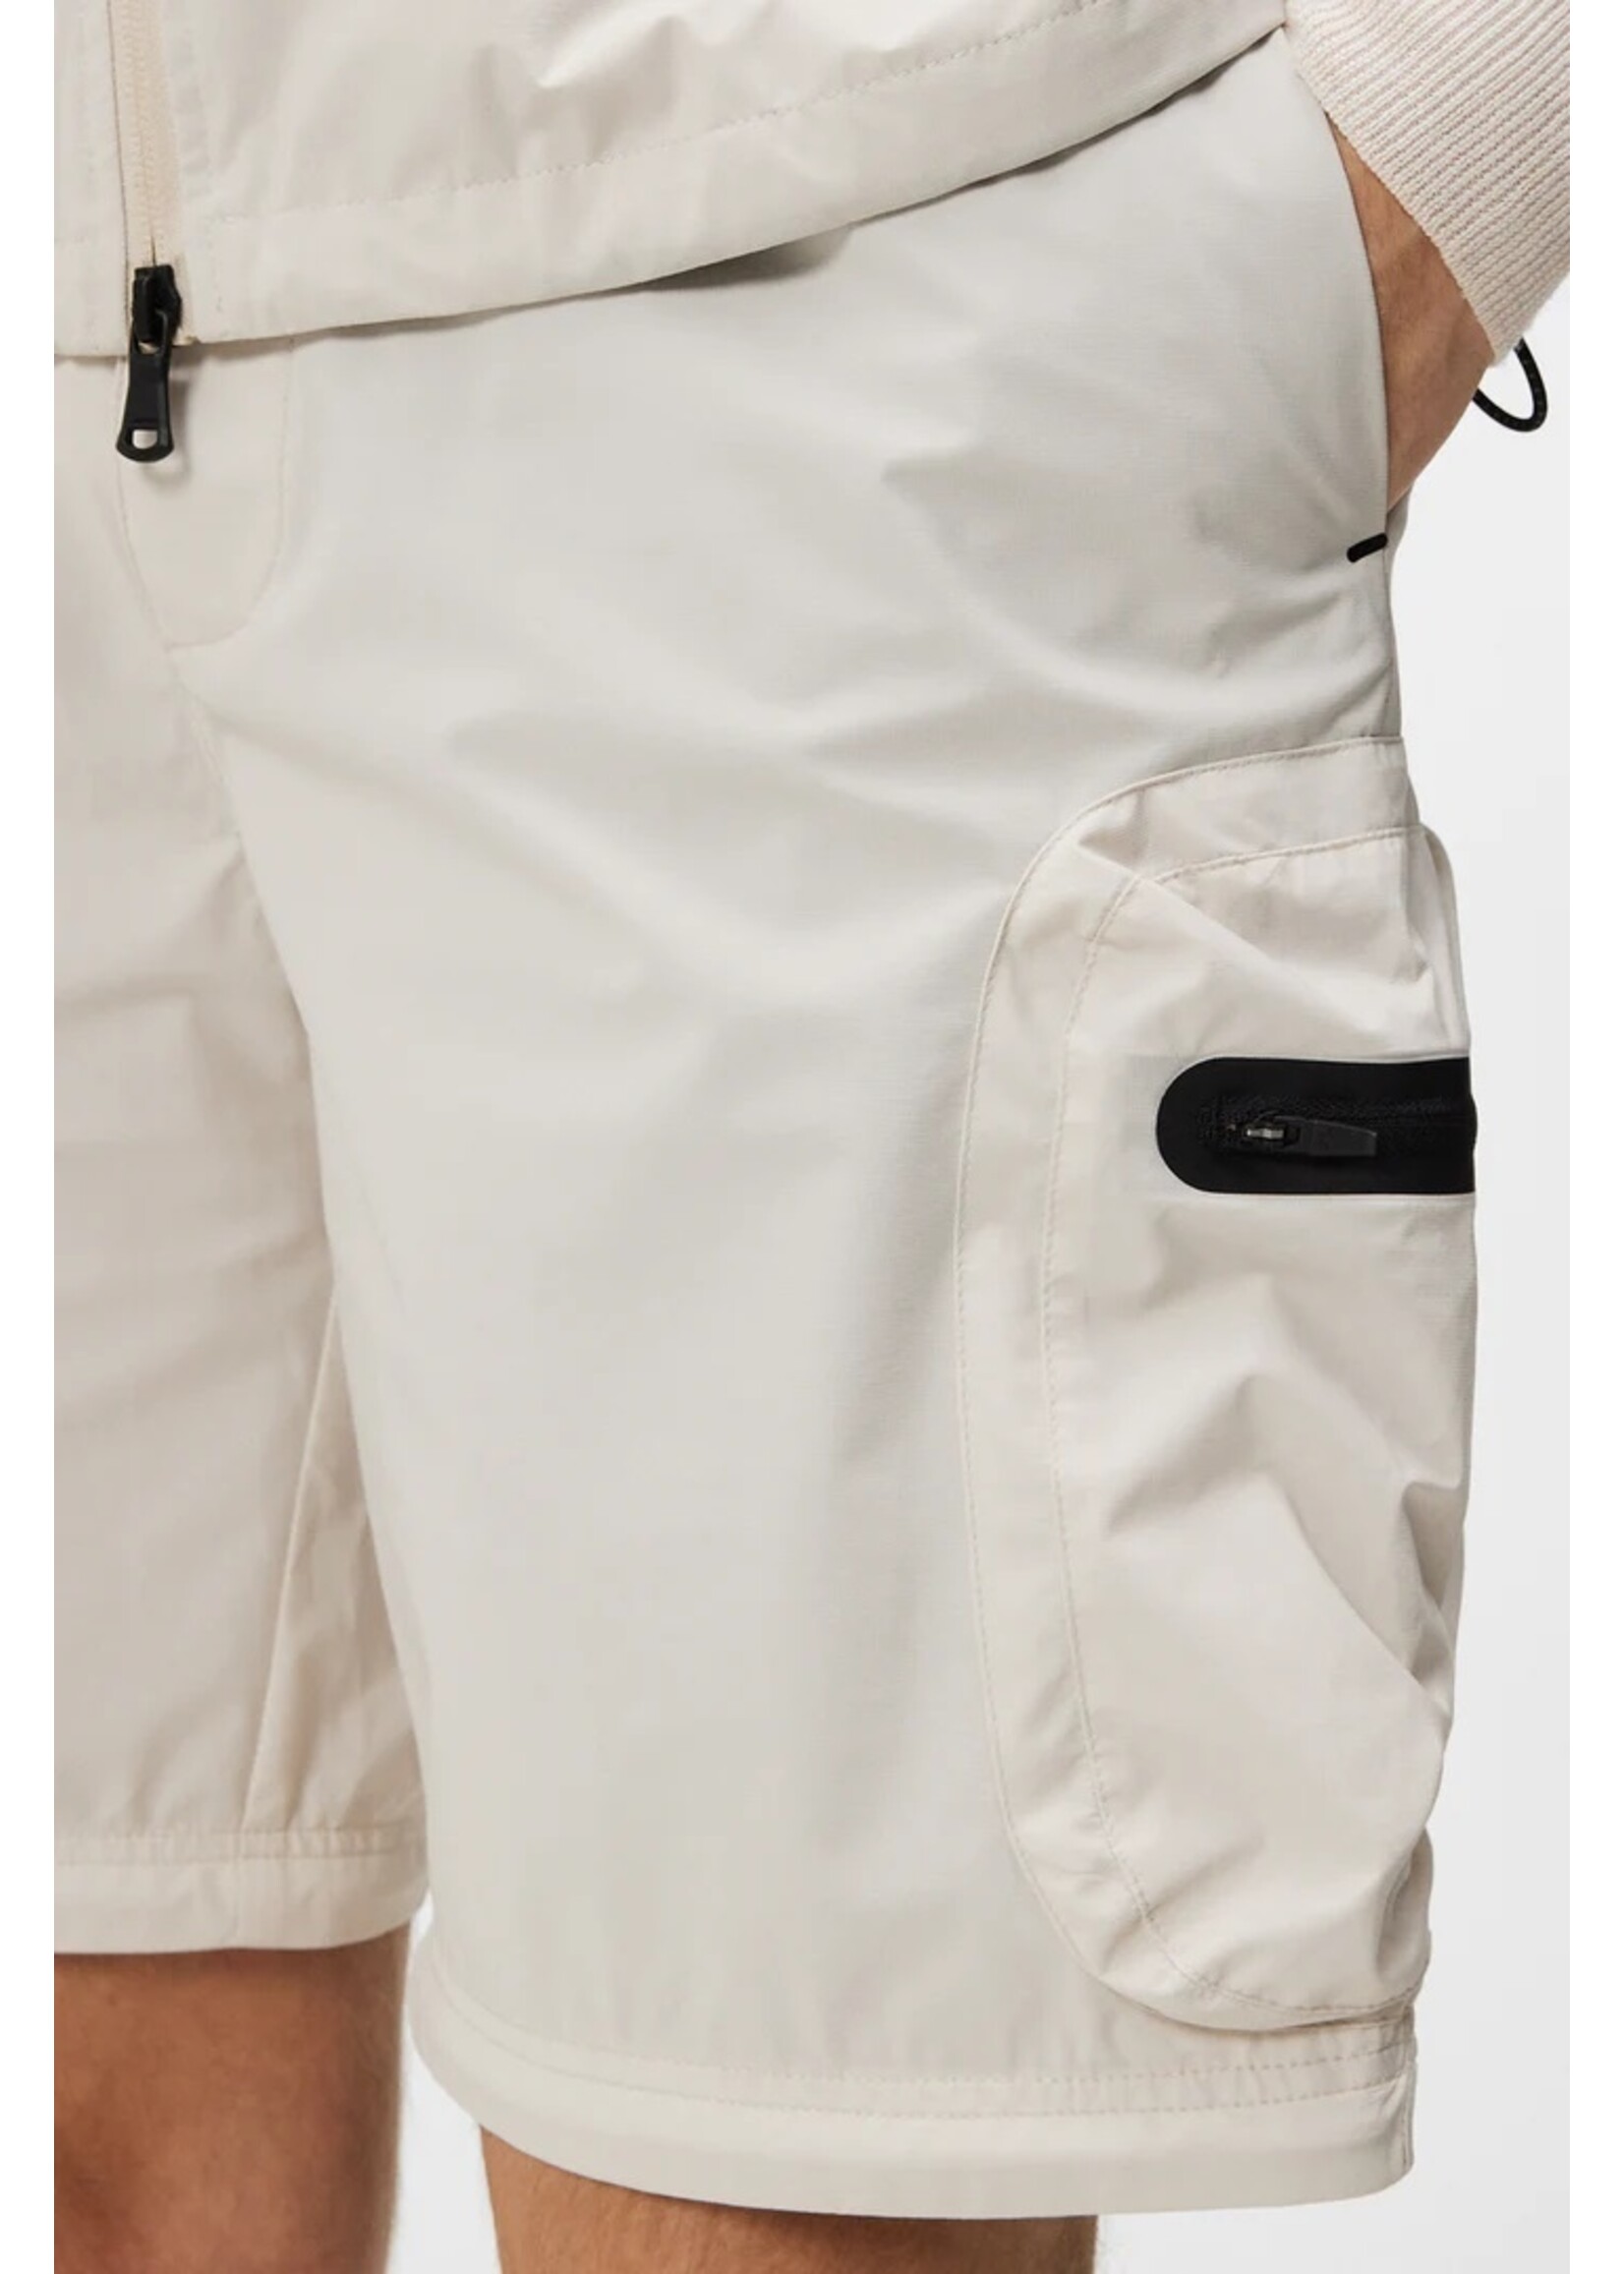 J. Lindeberg Glossa Zip-Off Trousers